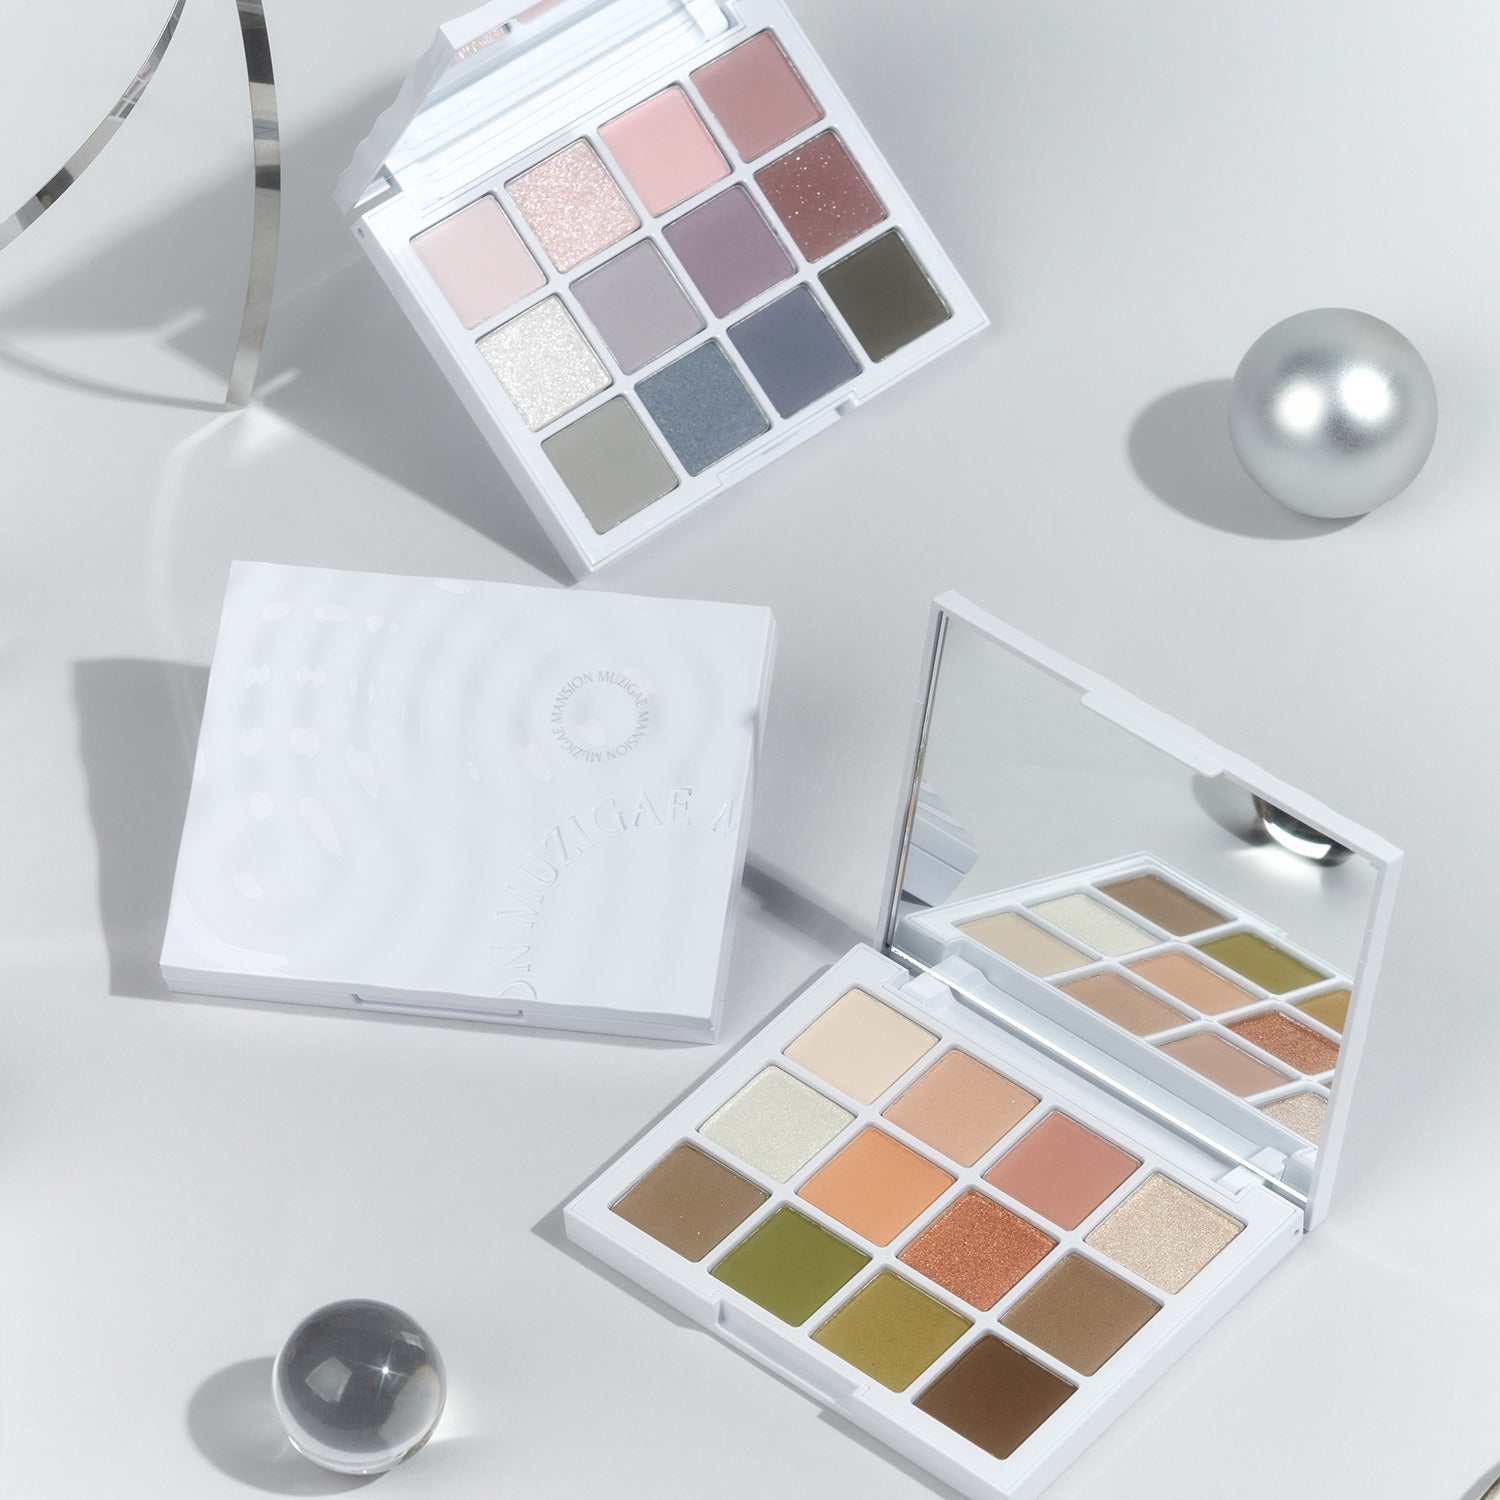 MUZIGAE MANSION Moire Palettes on sales on our Website !